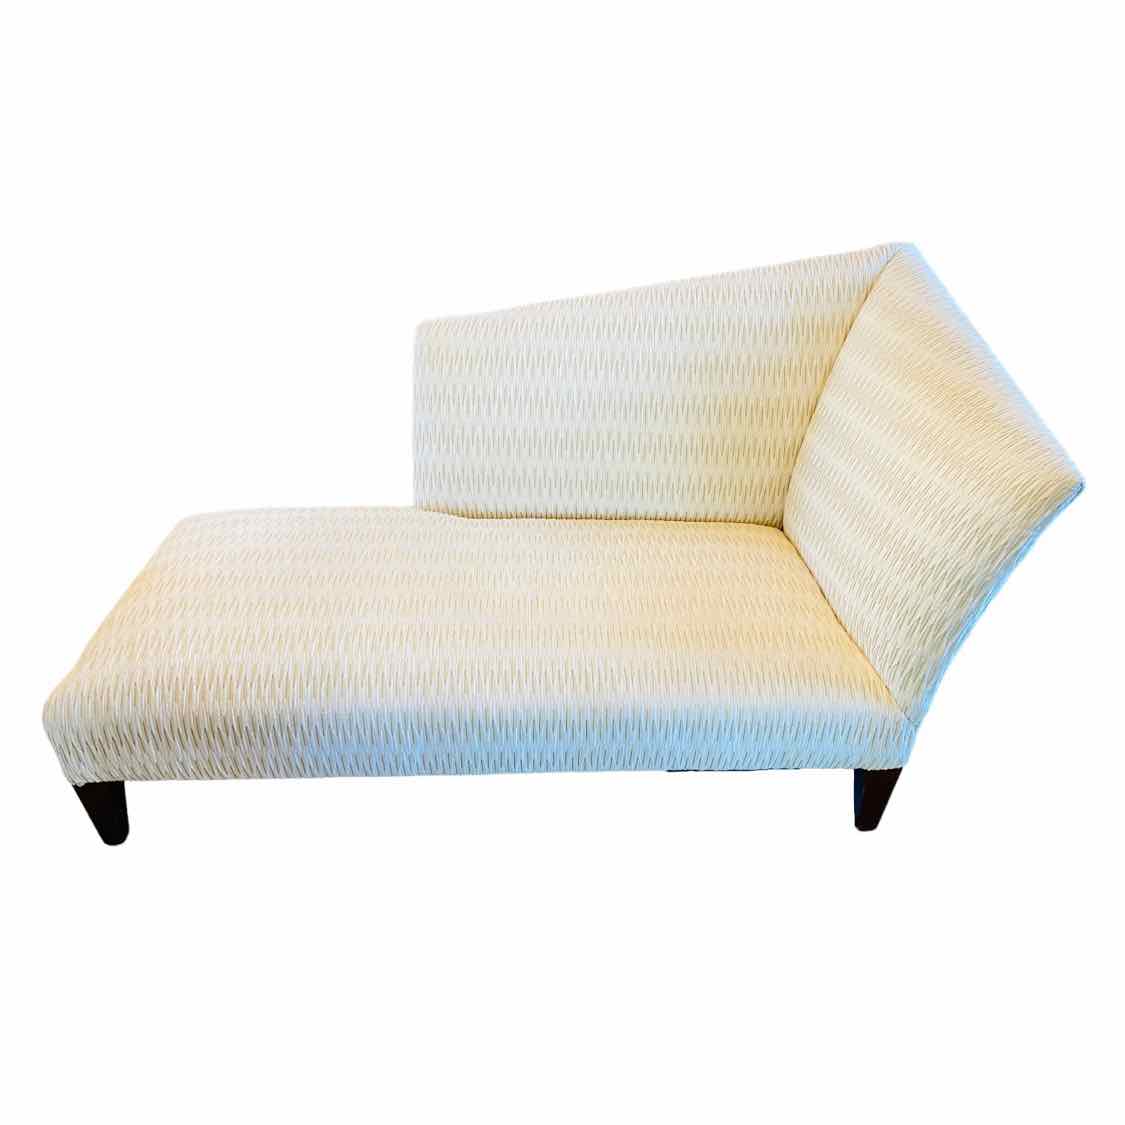 'Spirit' Chaise Lounge by John Hutton for Donghia - colletteconsignment.com